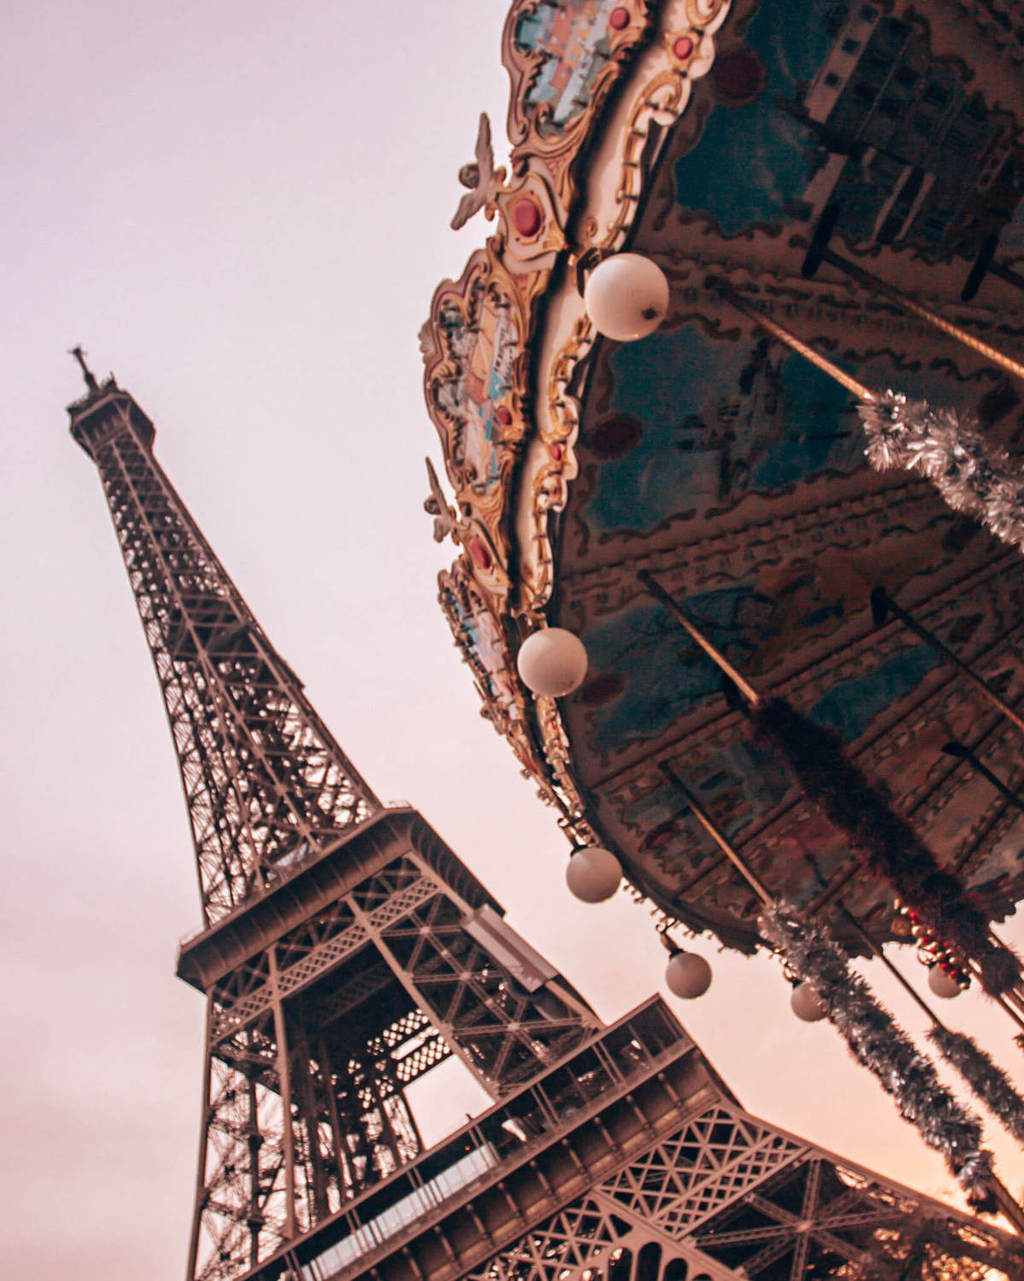 The Eiffel Tower and the carousel across the street by the Pont D'lena in Paris. Get a guide to the best photo spots in Paris at New Year's here.